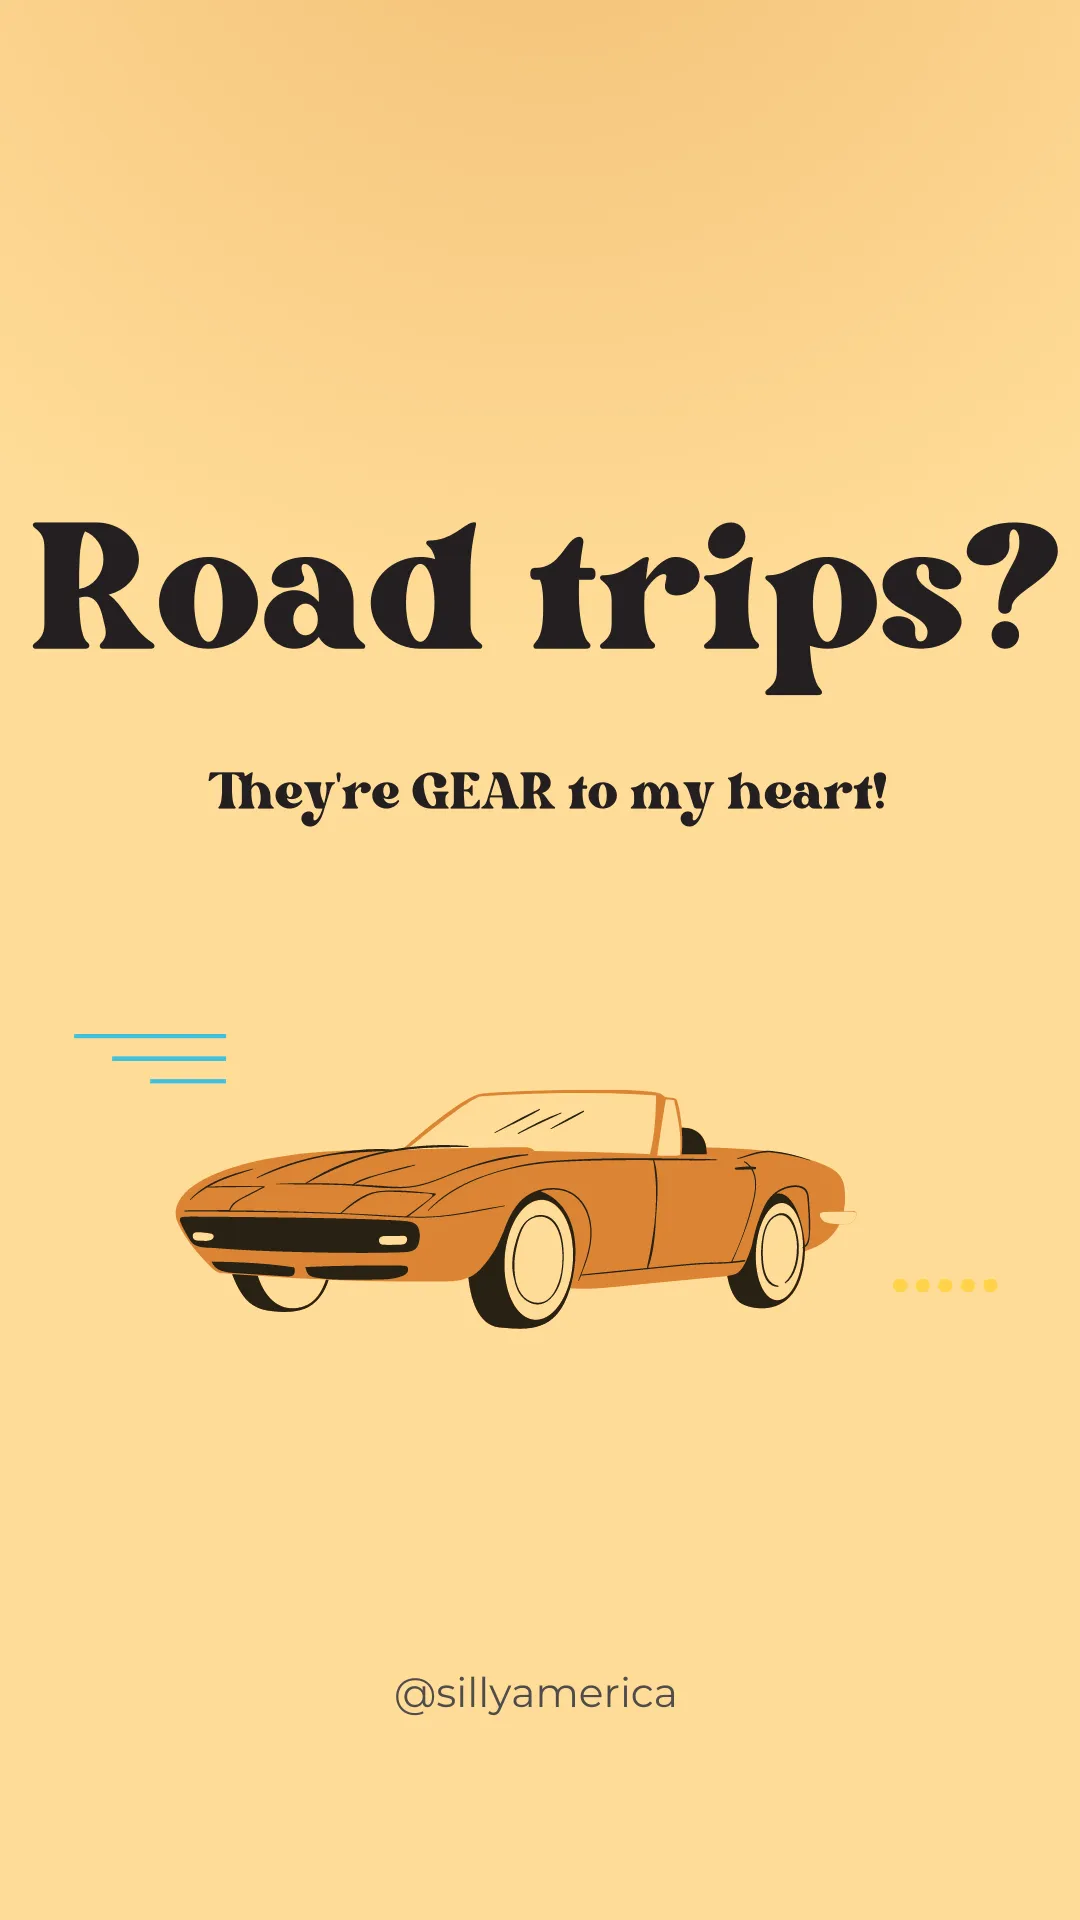 Road trips? They're GEAR to my heart! - Road Trip Puns